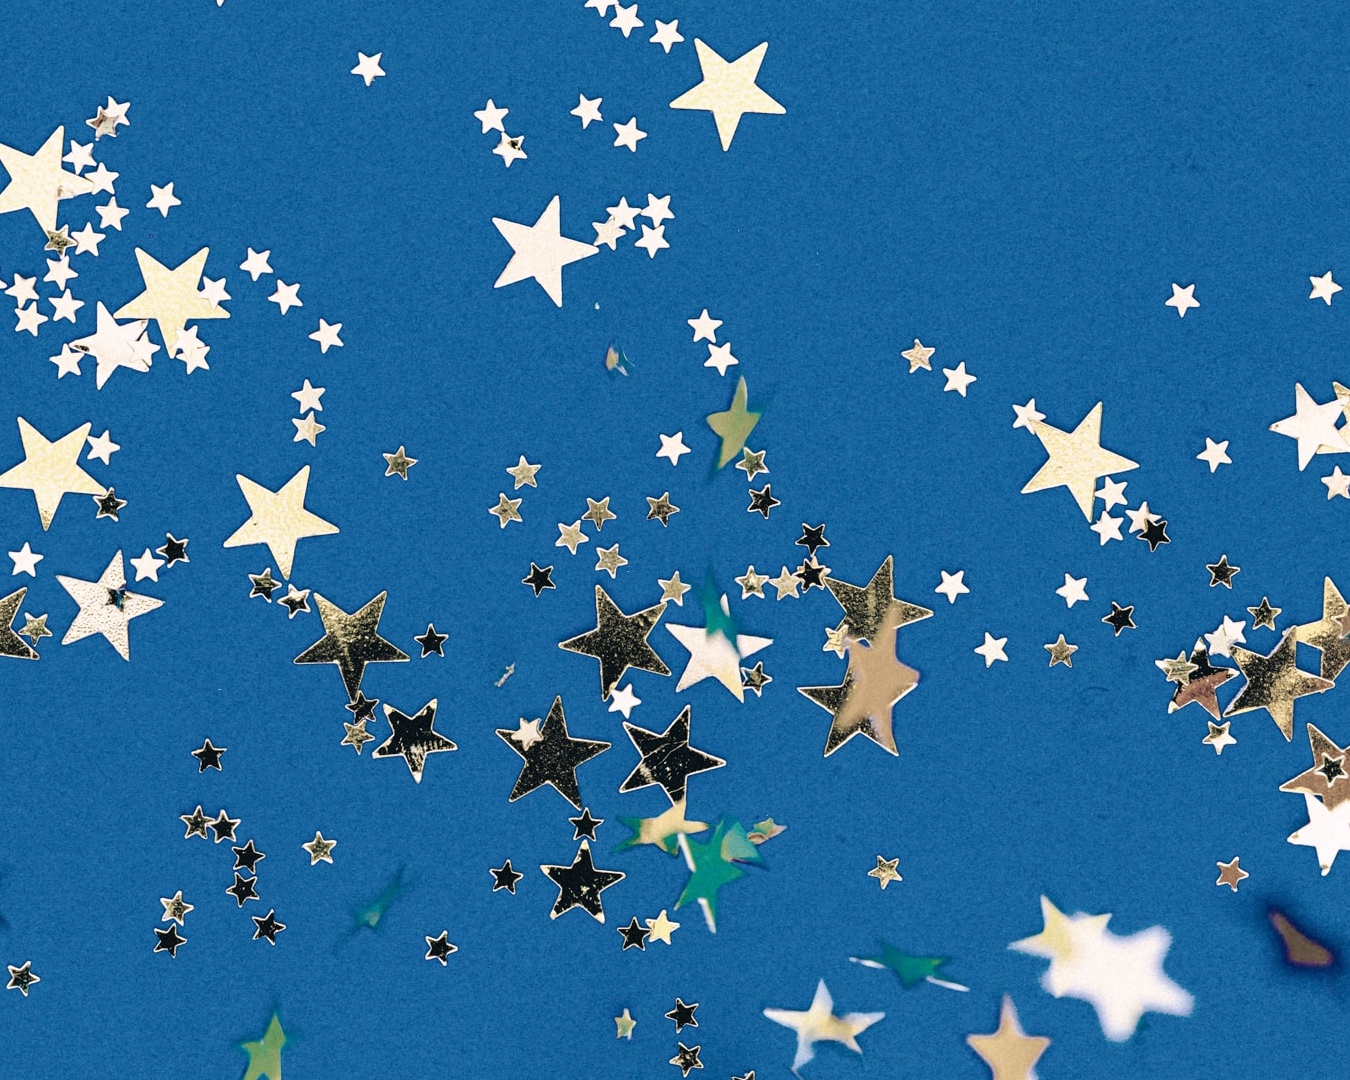 Star shaped confetti in assorted sizes on a blue background to look like the night sky. 